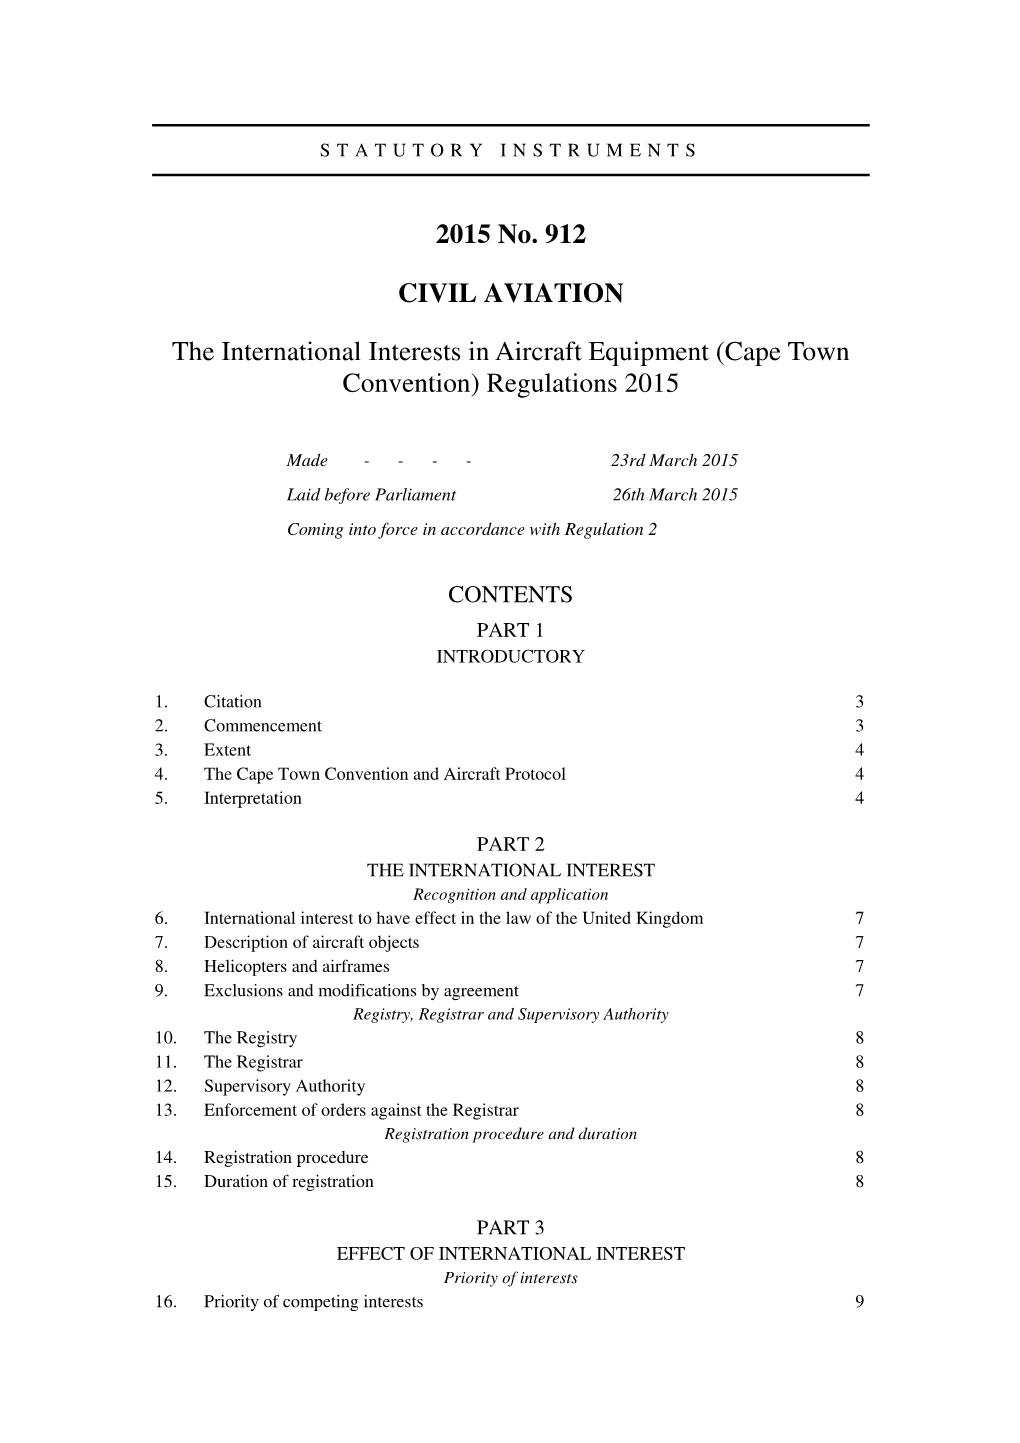 (Cape Town Convention) Regulations 2015